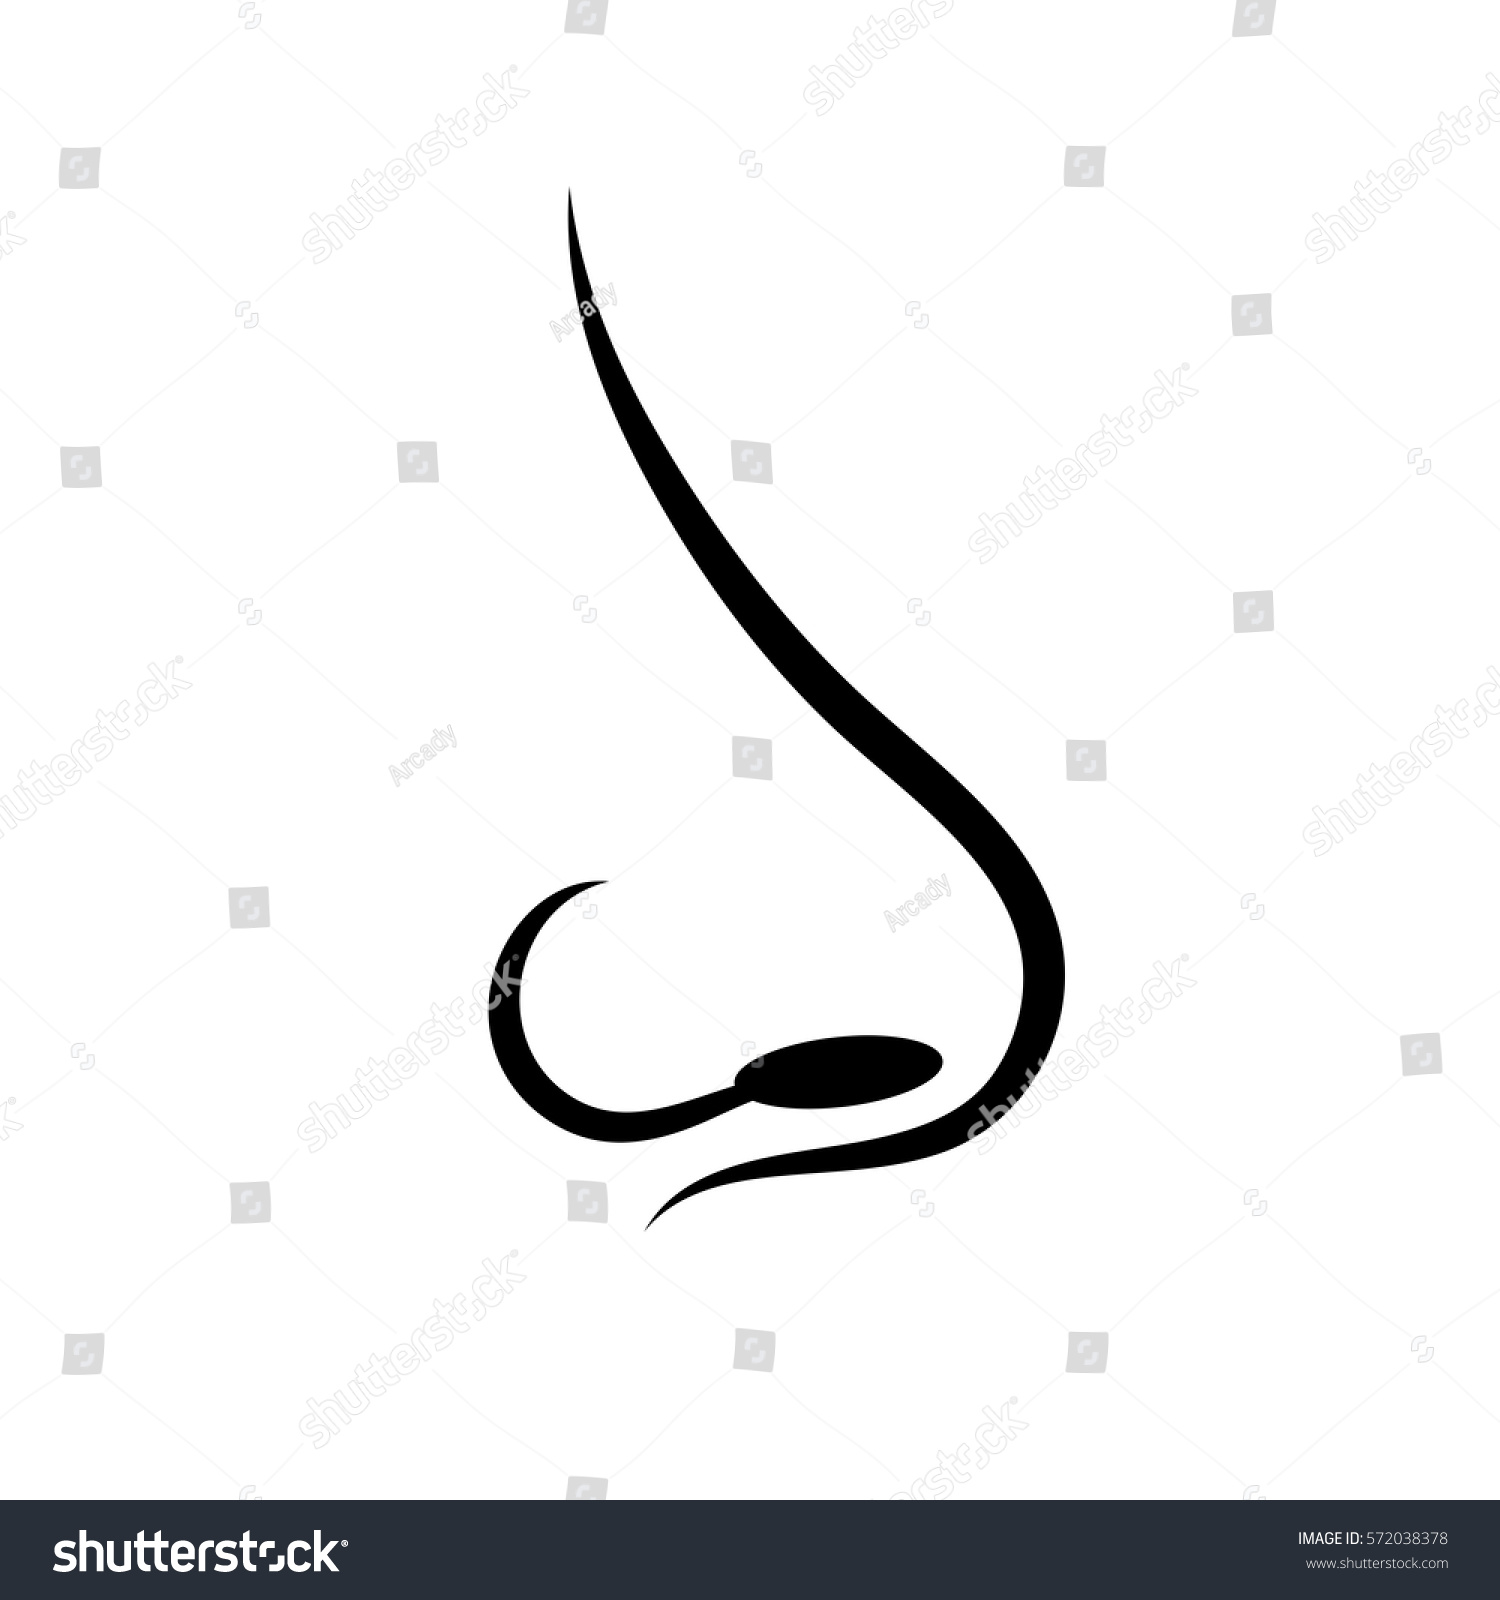 Human Nose Vector Icon On White Stock Vector 572038378 - Shutterstock